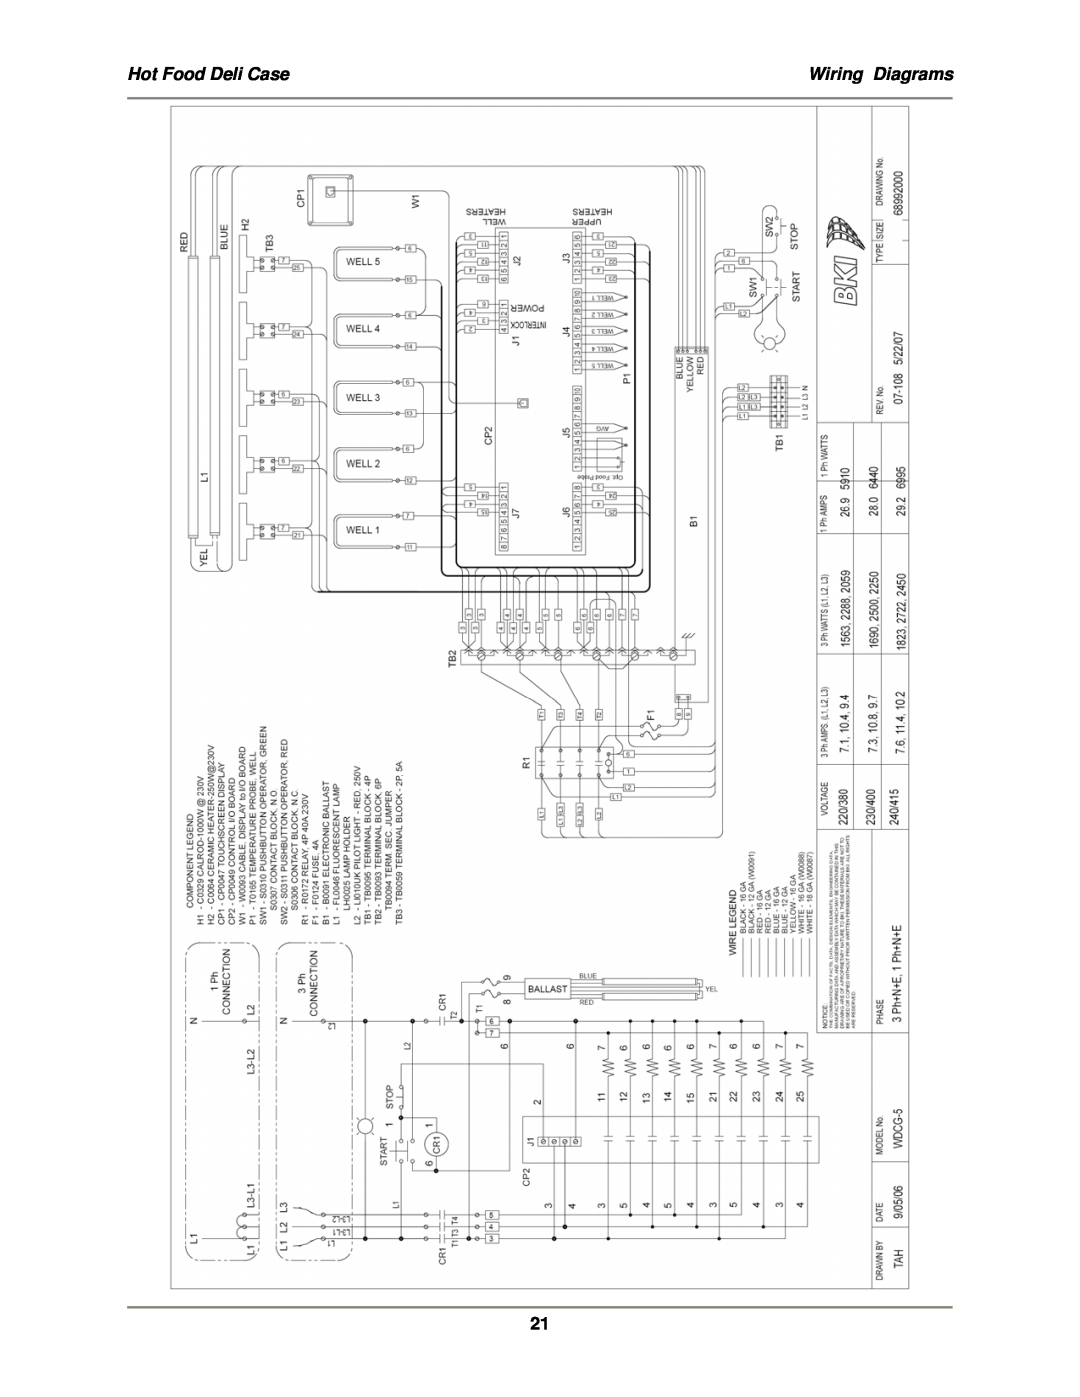 Bakers Pride Oven CSWG, WDCG, SSWG operation manual Hot Food Deli Case, Wiring Diagrams 